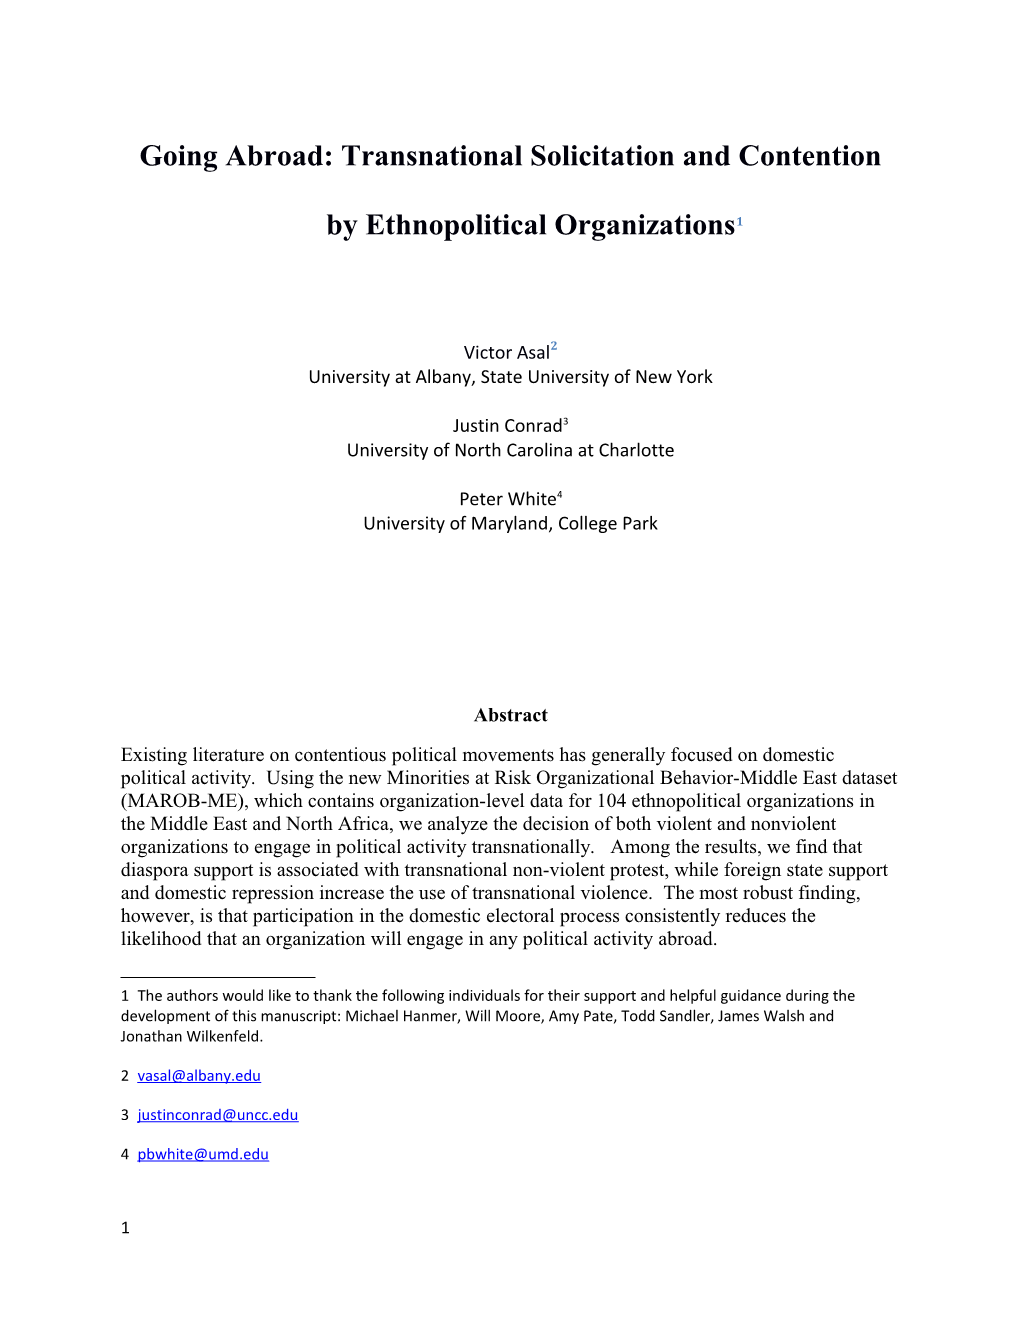 Going Abroad: Transnational Solicitation and Contention by Ethnopolitical Organizations 1